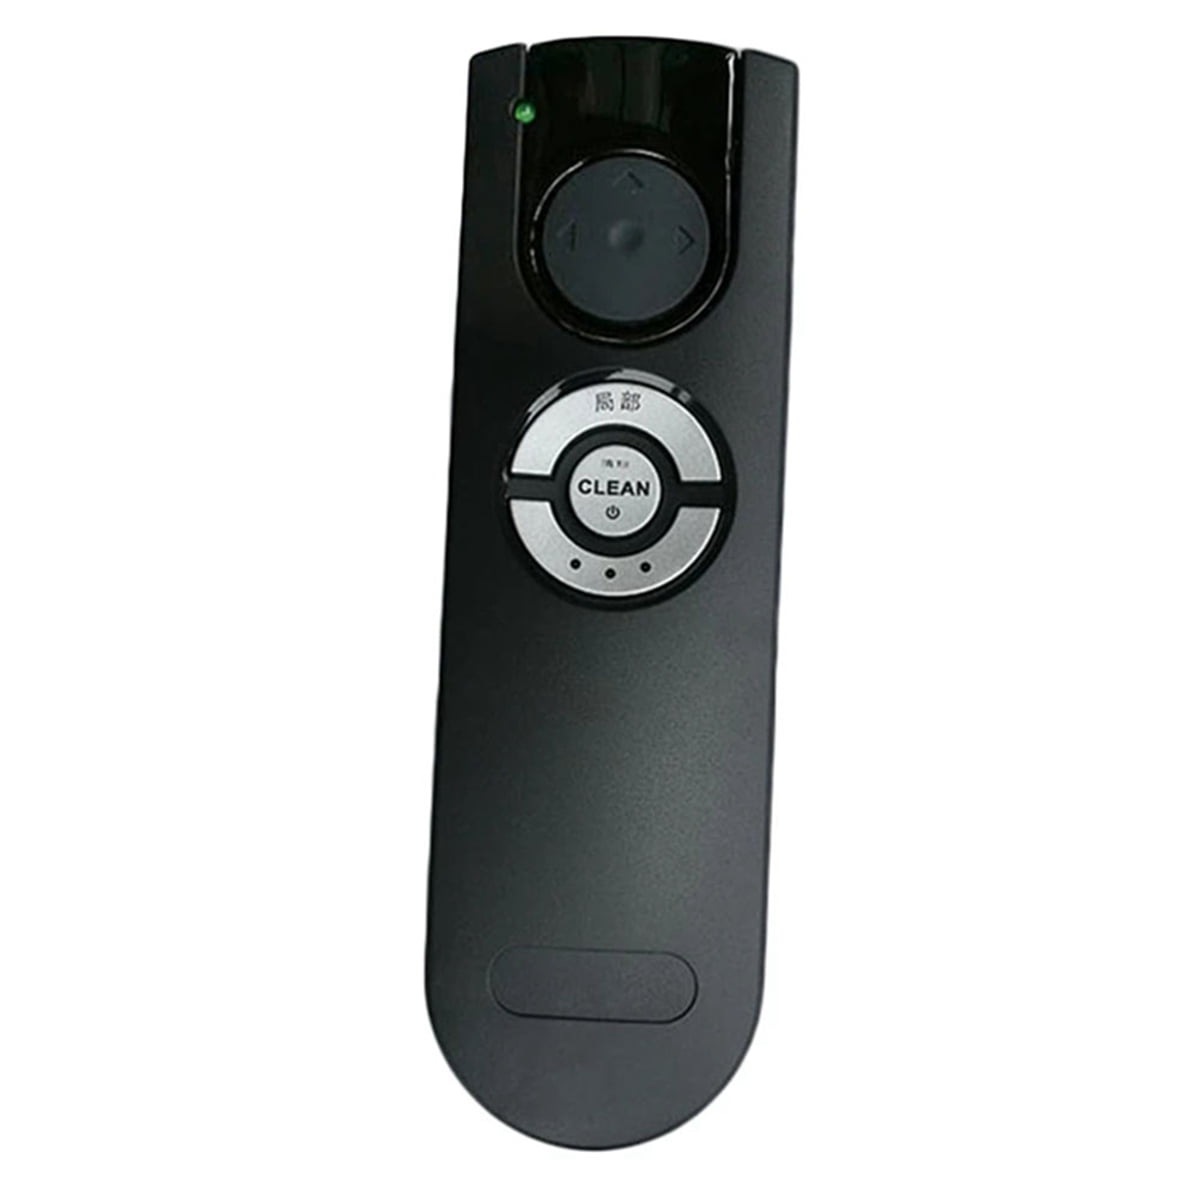 Remote Control For IRobot Roomba 500 600 700 800 Series Vacuum Cleaner New 